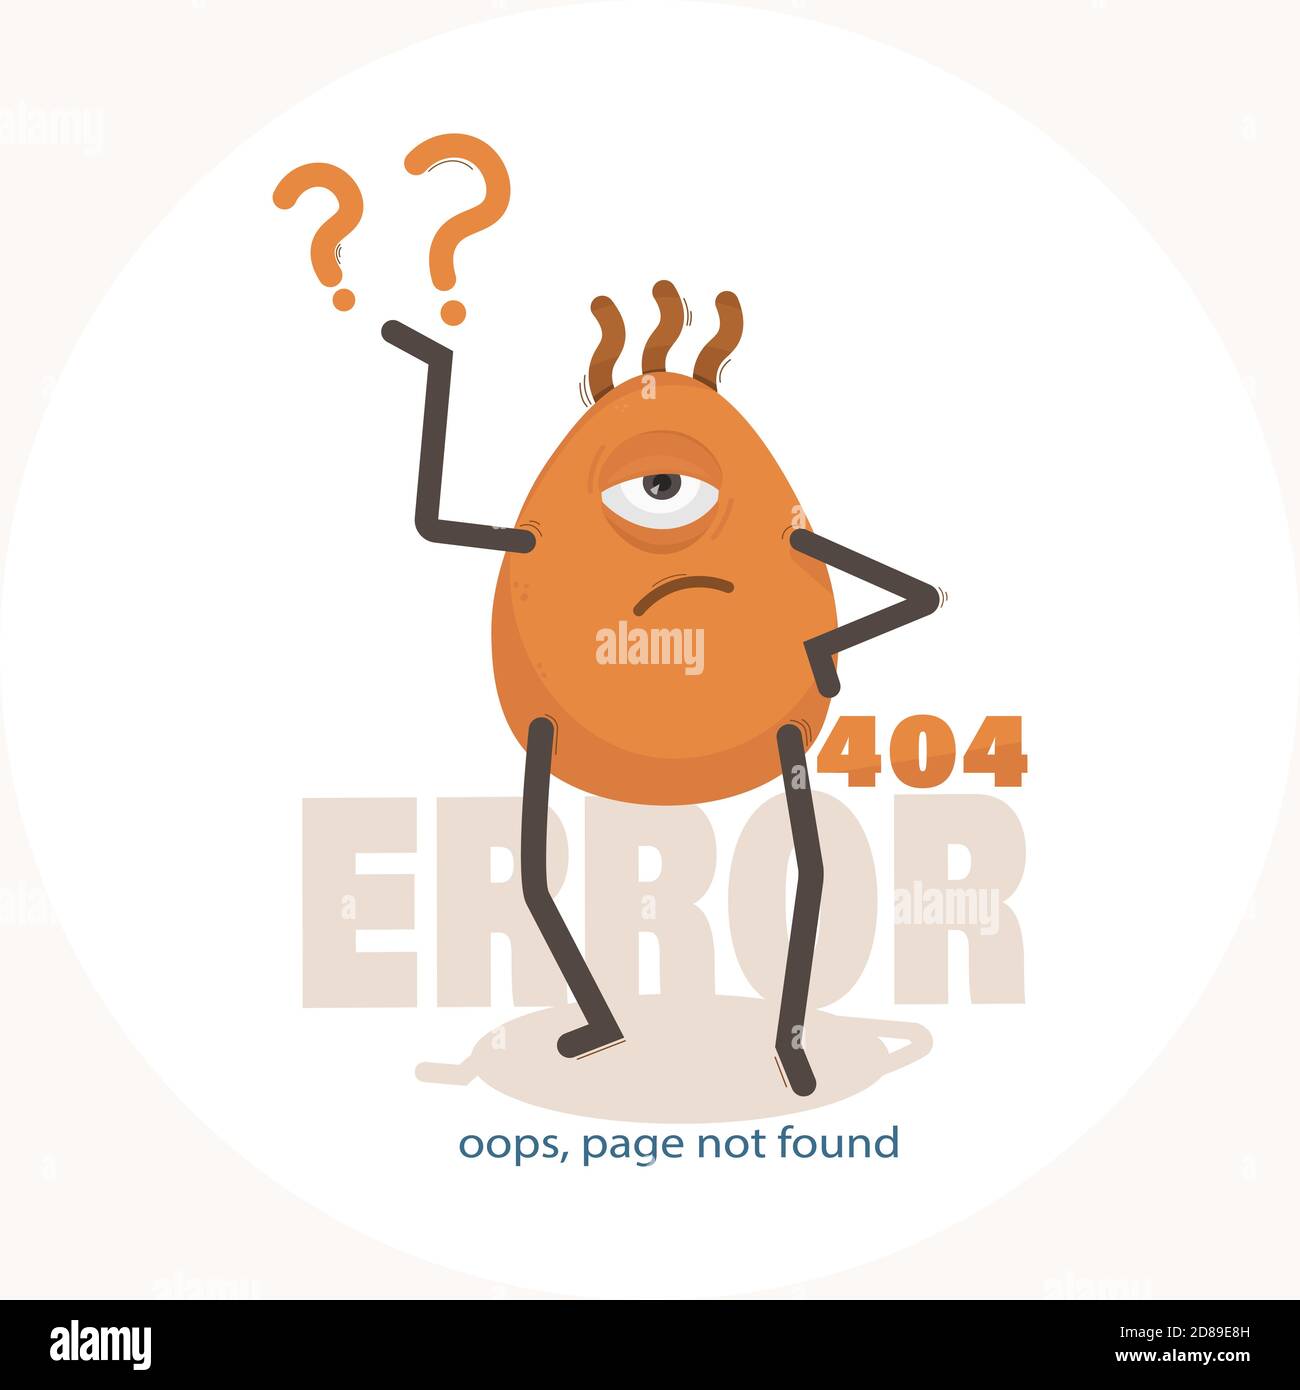 Error 404 oops page not found. Vector illustration of cartoon one-eyed character Stock Vector